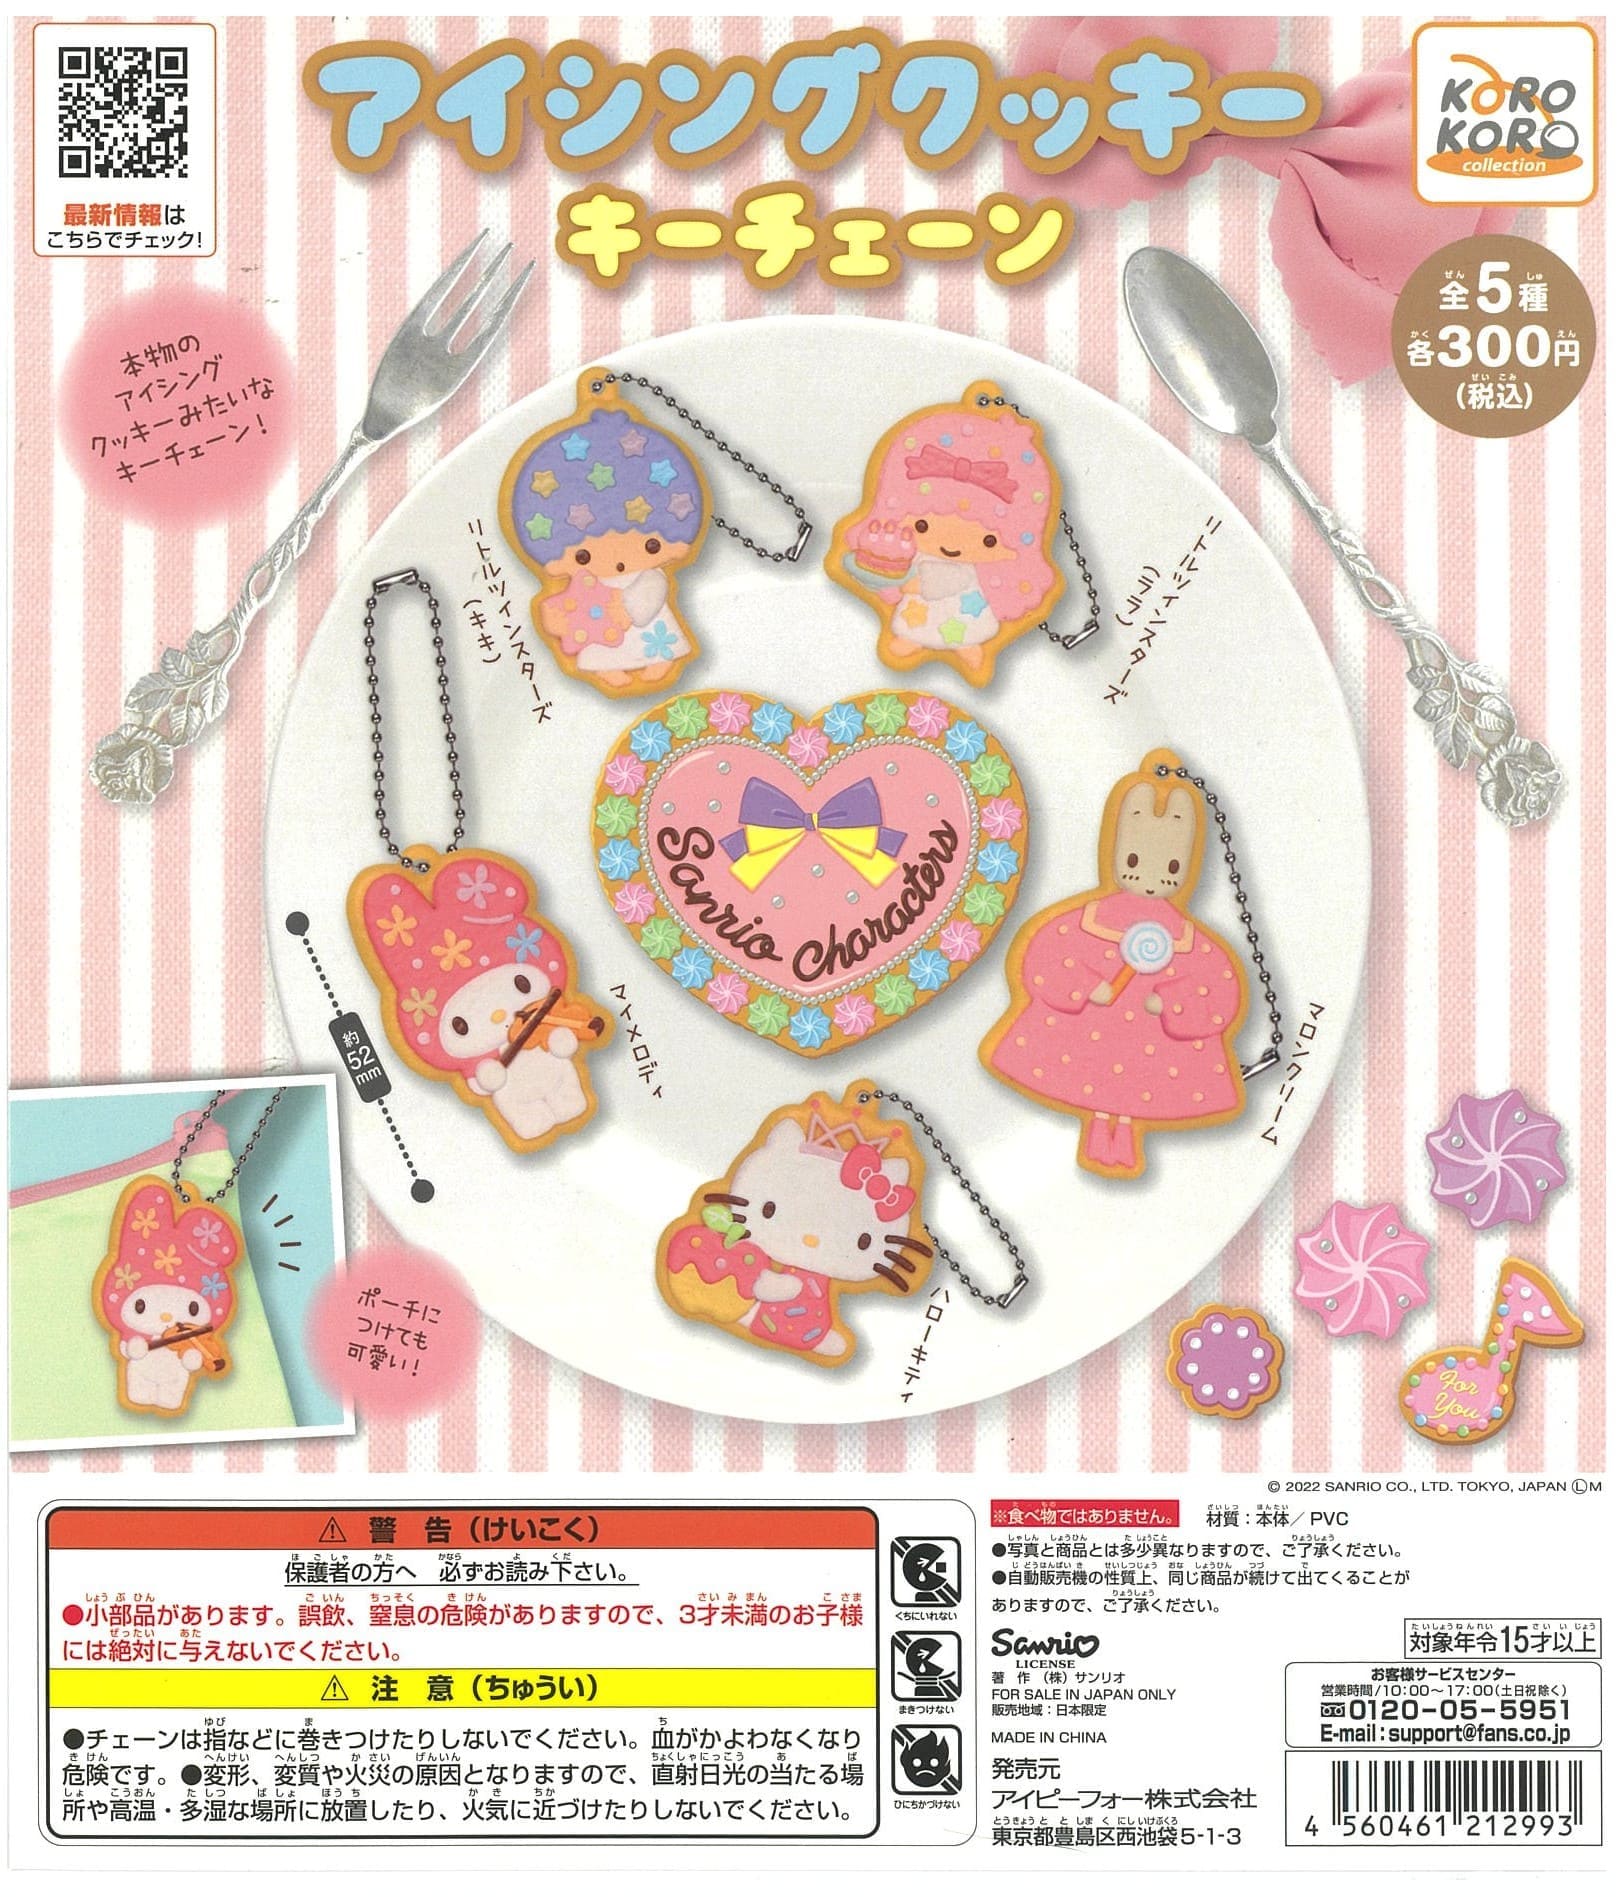 KoroKoro Collection CP2062 Sanrio Characters Icing Cookie Key Chain